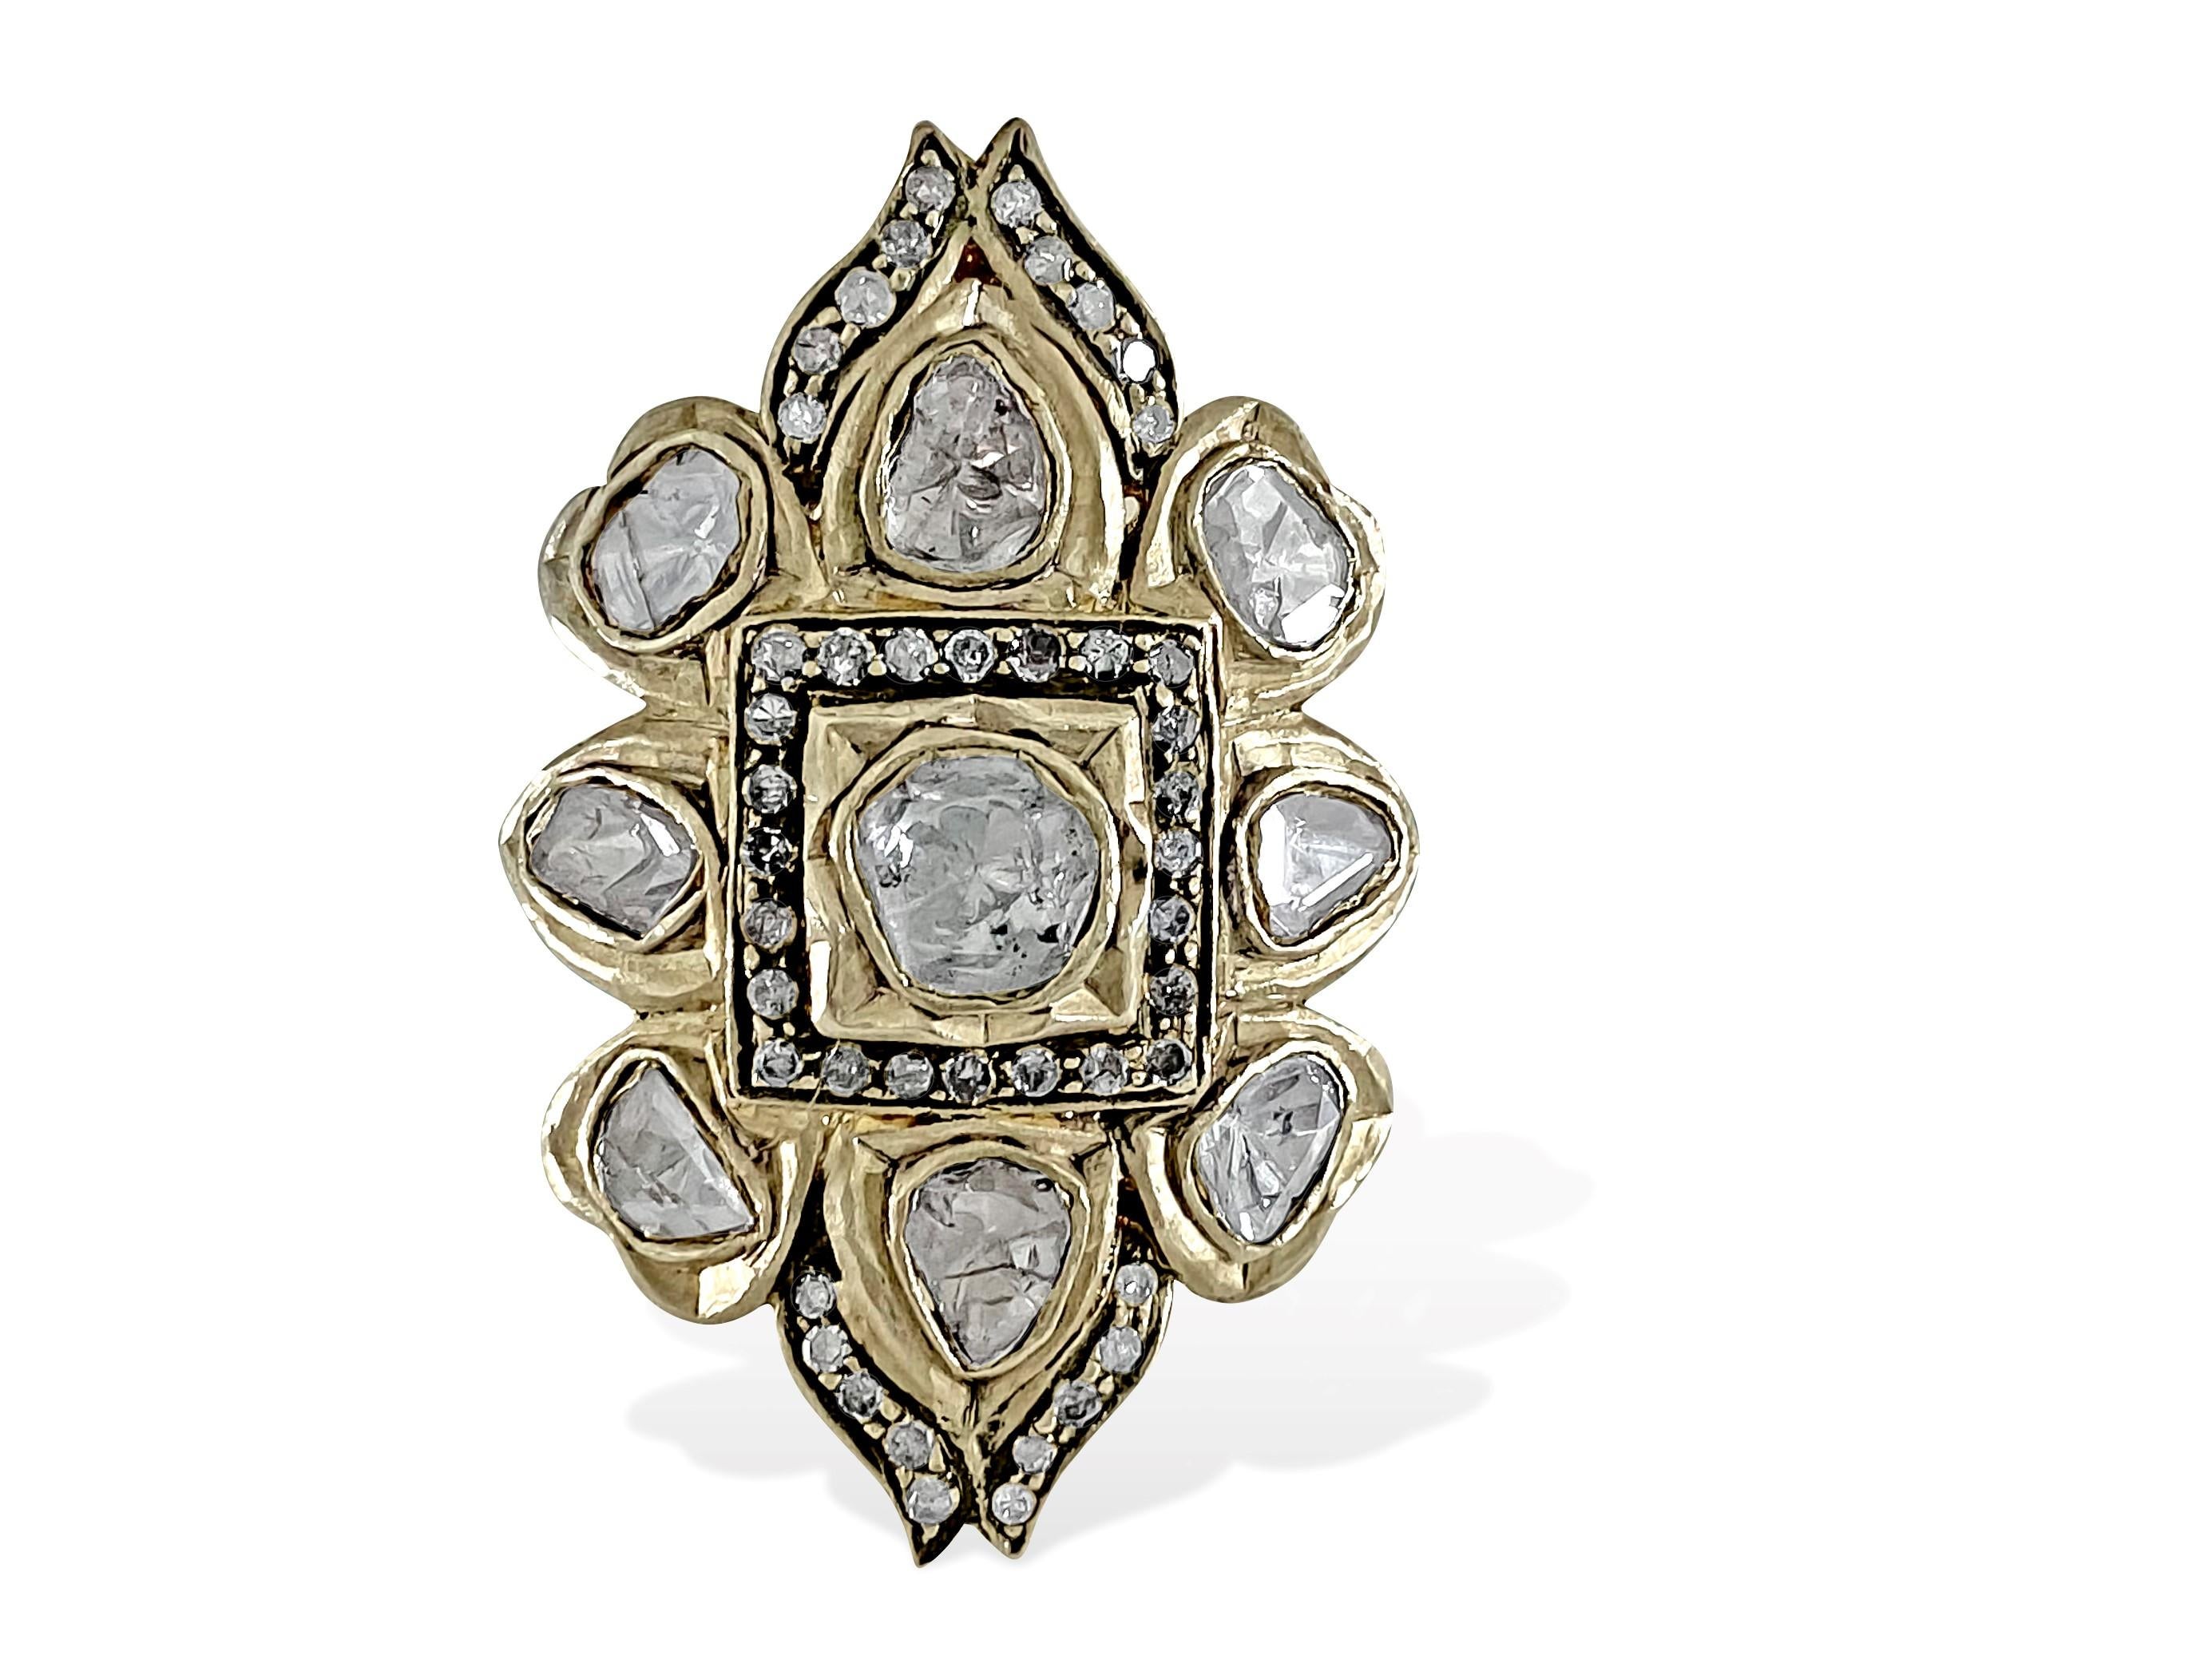 This unique ring features a natural rose-cut diamond pave set in sterling silver and complemented by 14K yellow gold accents. With a gross weight of 10.40 grams, including 4.60 grams of 14K yellow gold and 5.45 grams of 925 sterling silver, it